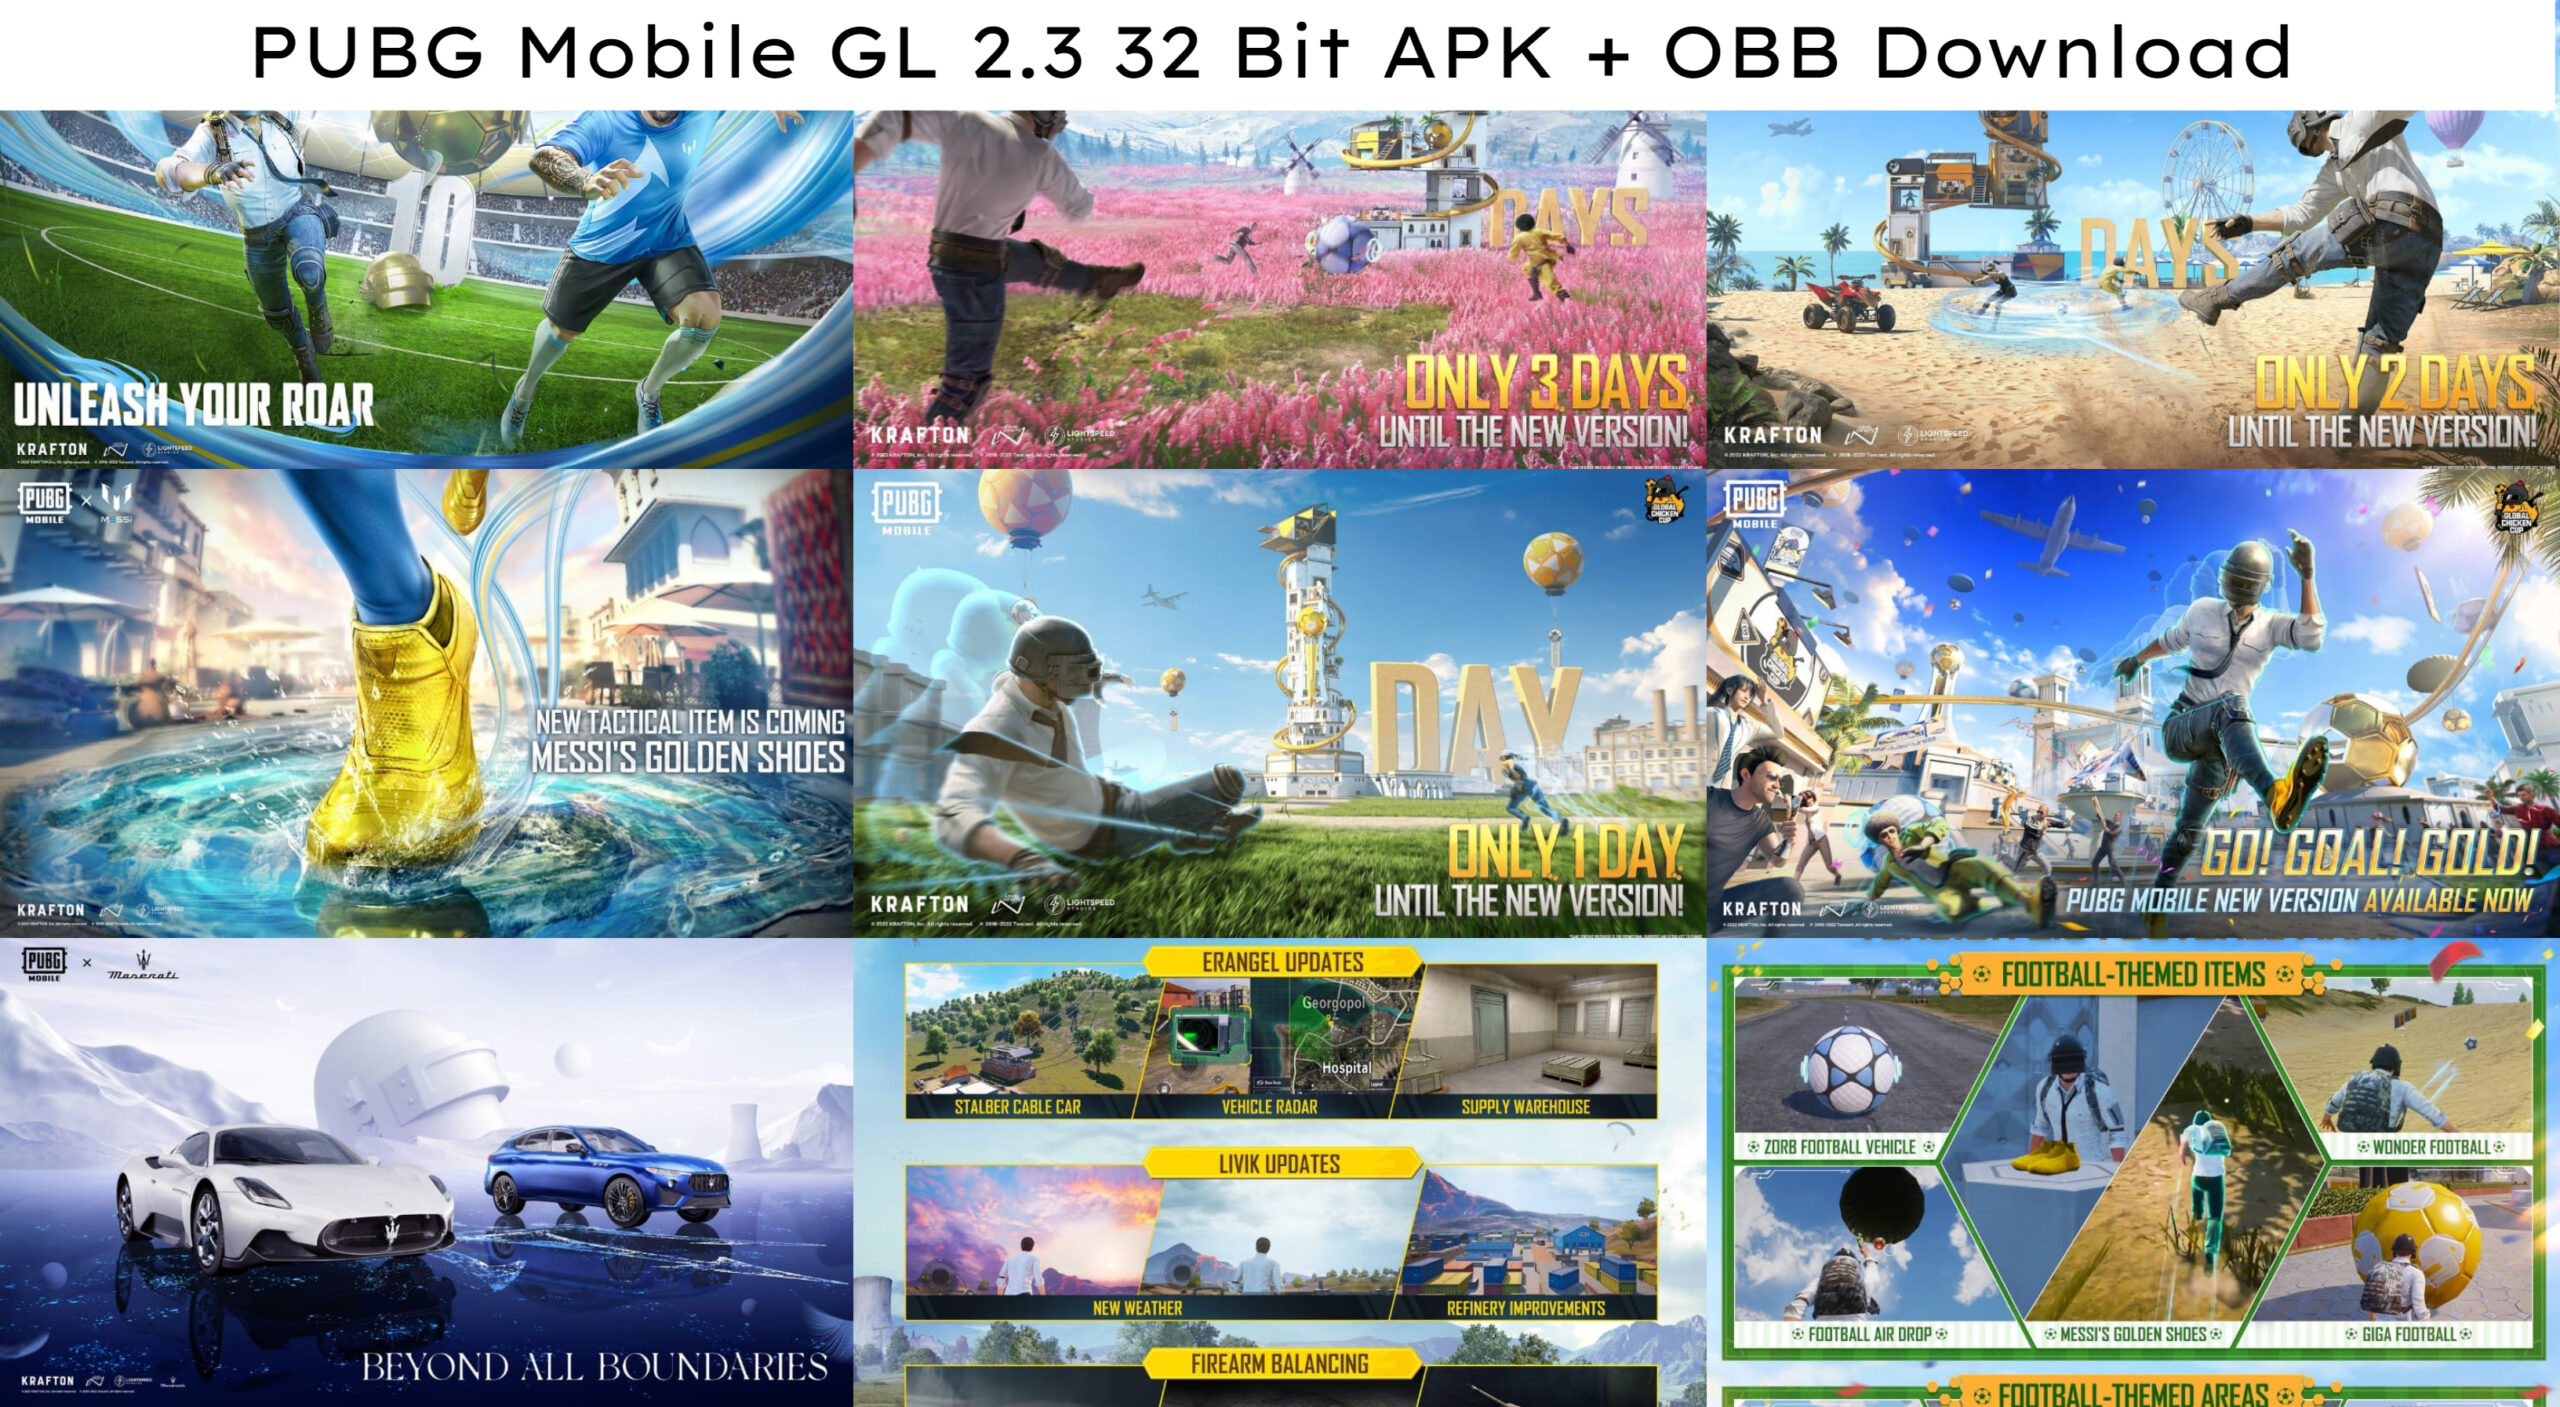 You are currently viewing PUBG Mobile GL 2.3 32 Bit APK + OBB Download